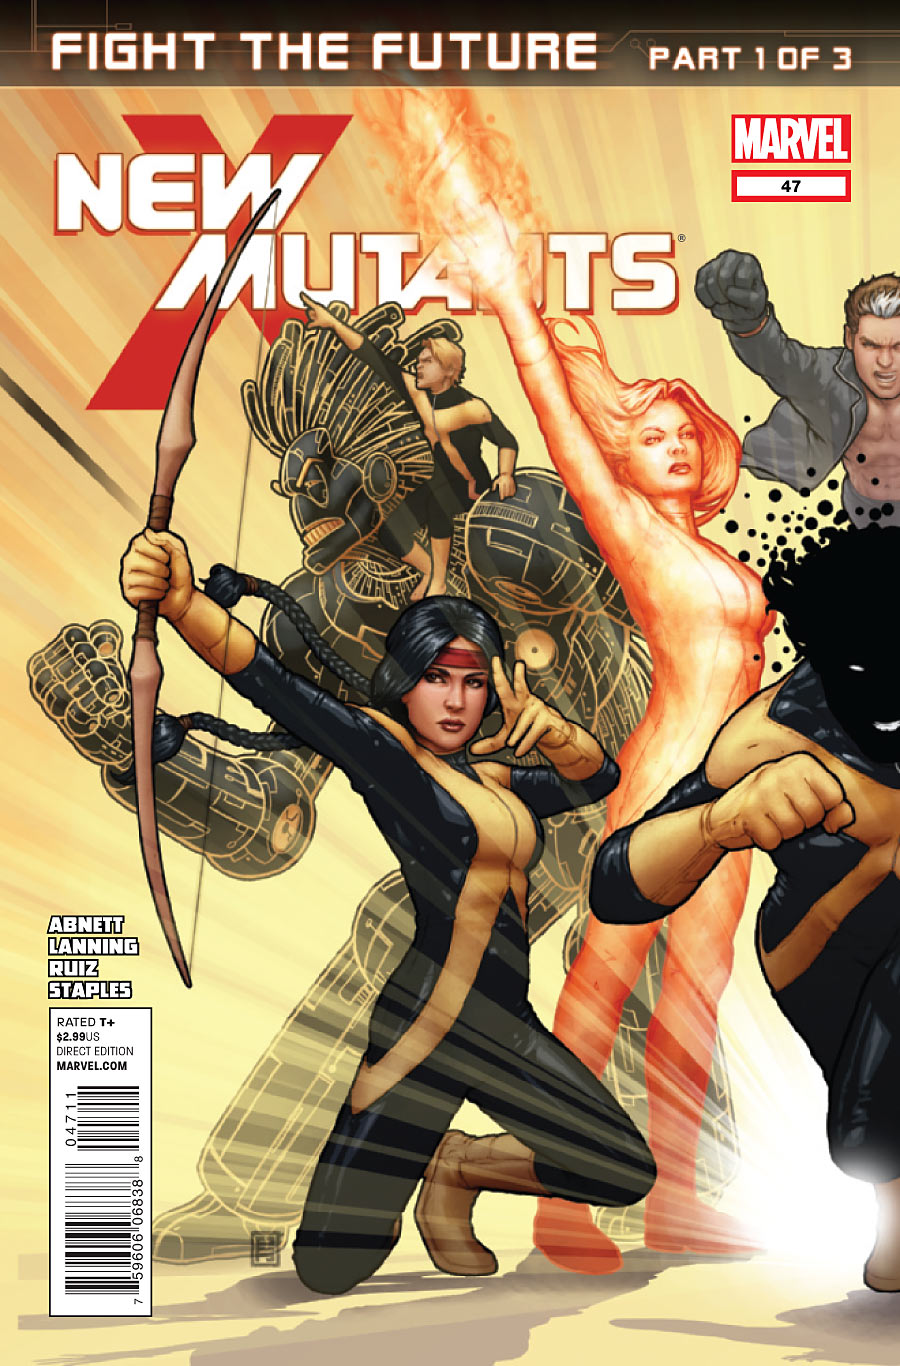 The New Mutants by Abnett and Lanning Vol. 2 (Complete Collection)